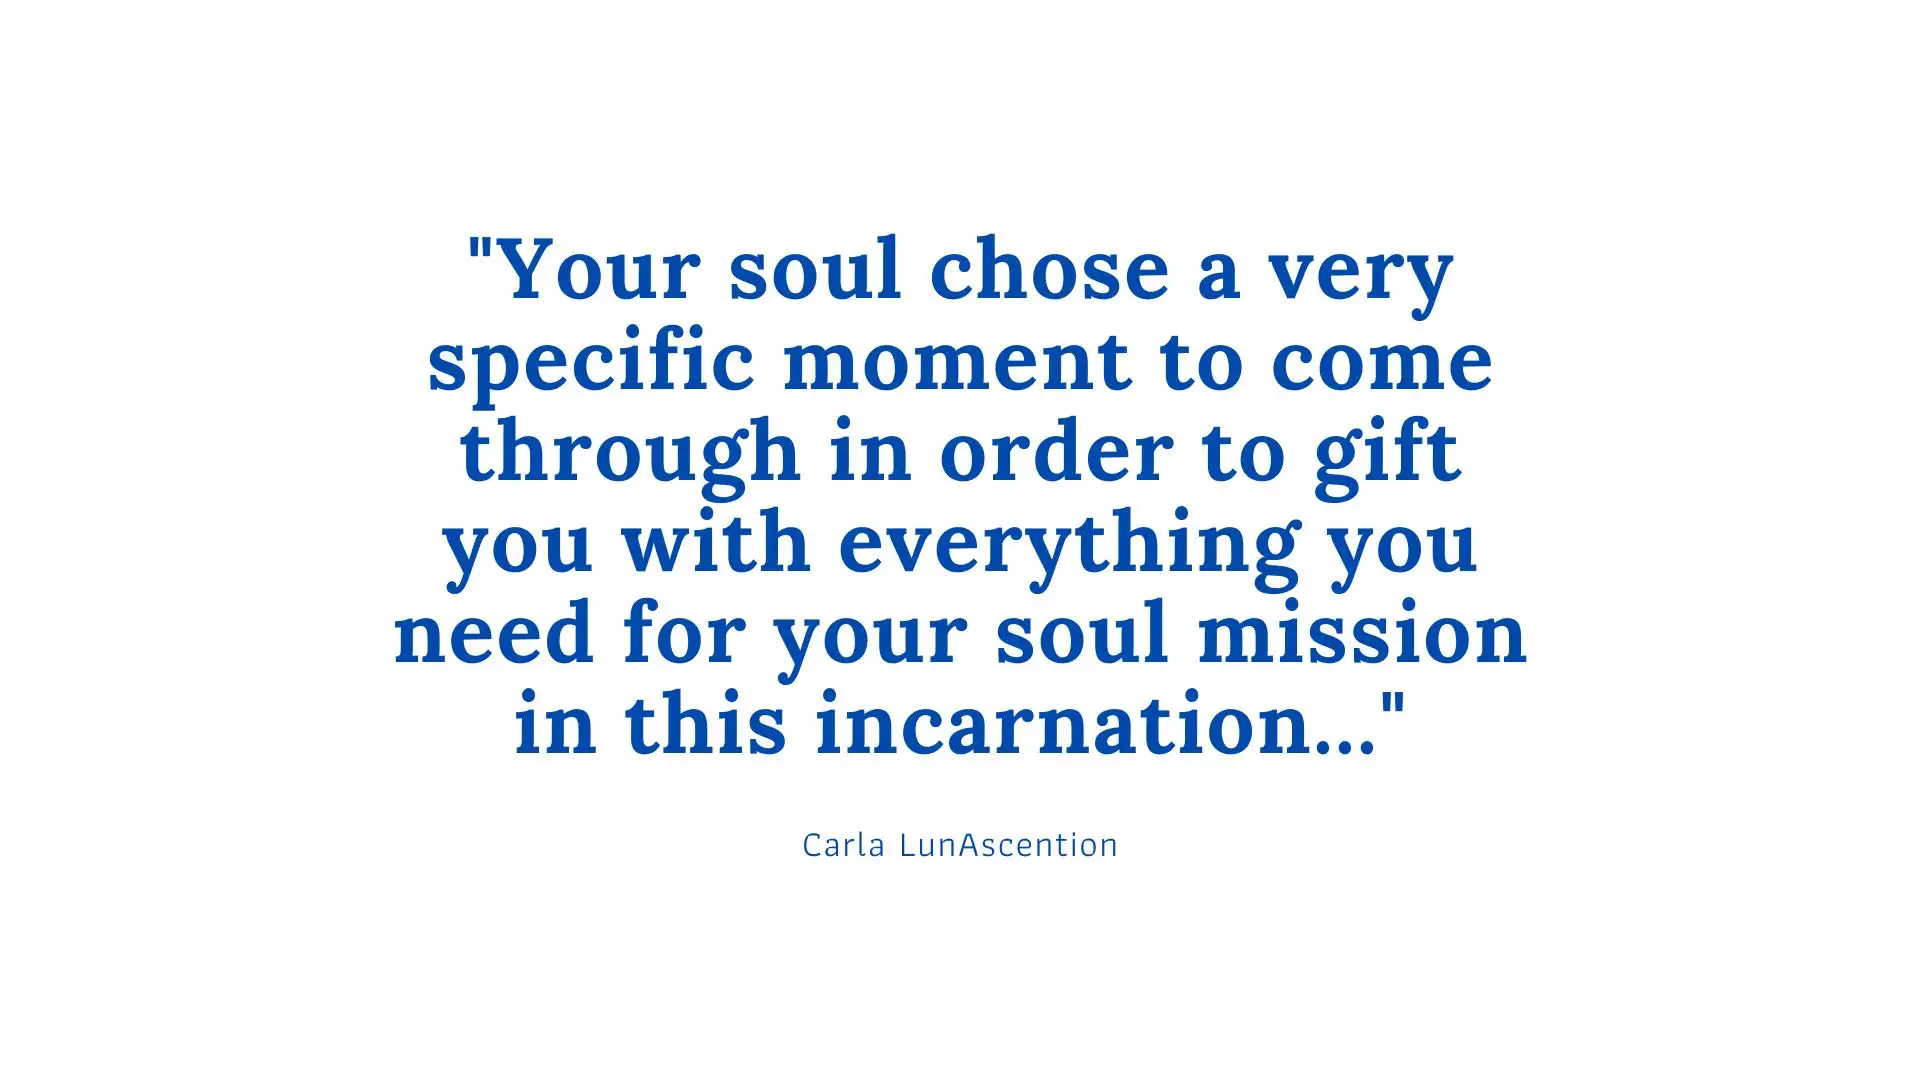 Astrology Quote by Psychic Carla LunAscention "Before you were born your soul chose a very specific moment to come through according to the kinds of influences that you would need to aid your journey in this life"